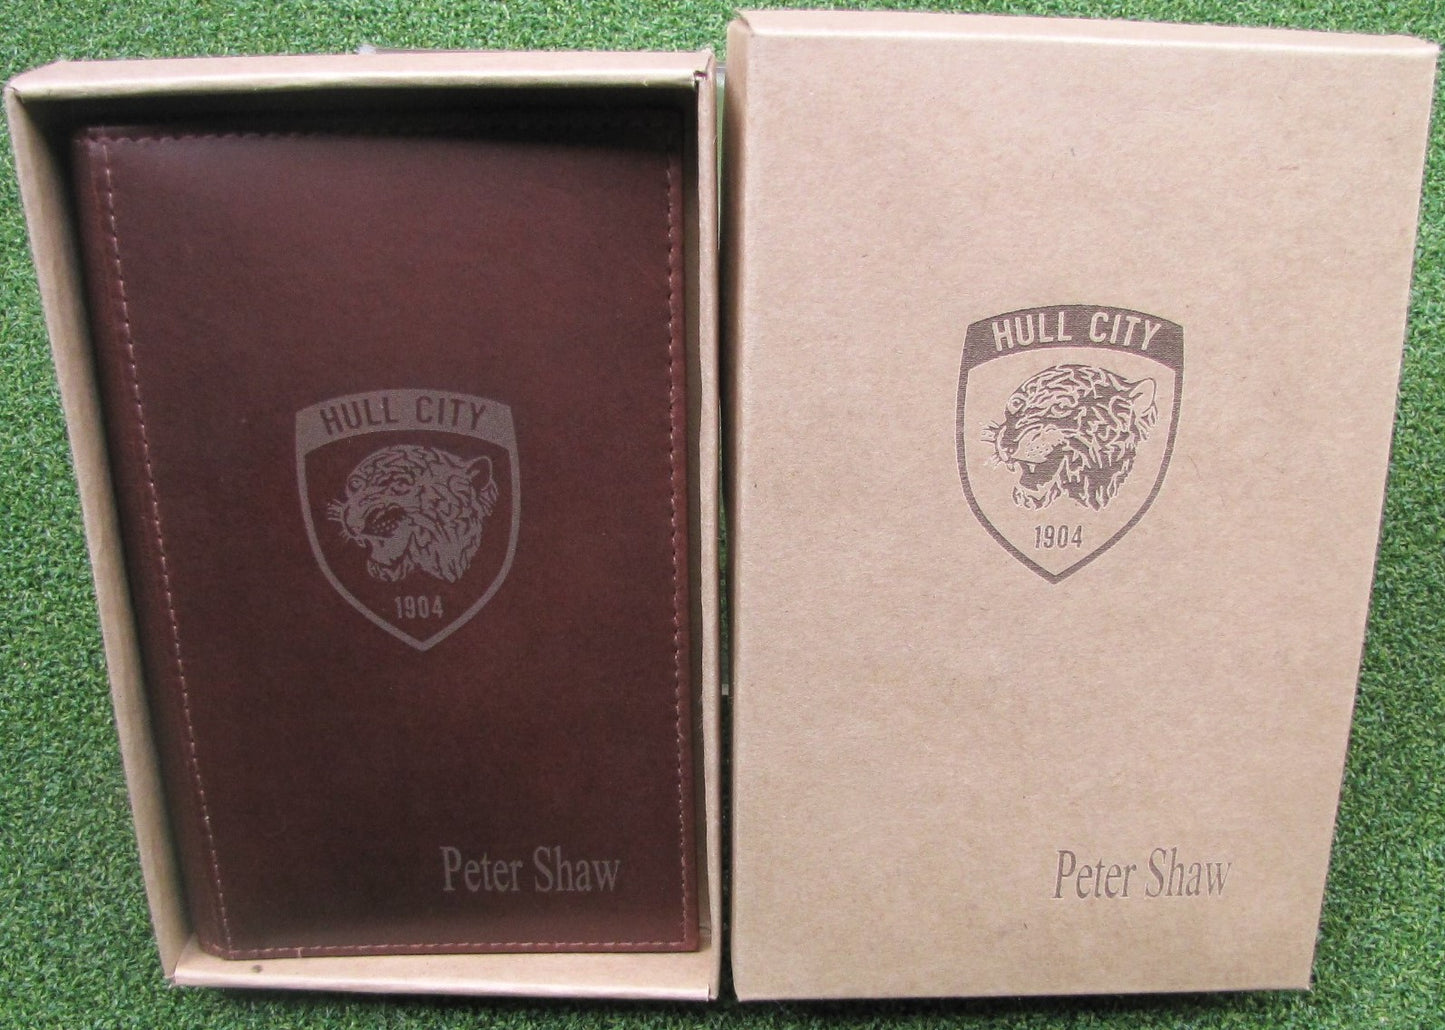 Genuine Leather Brown Golf Score Holder with Option to Personalise